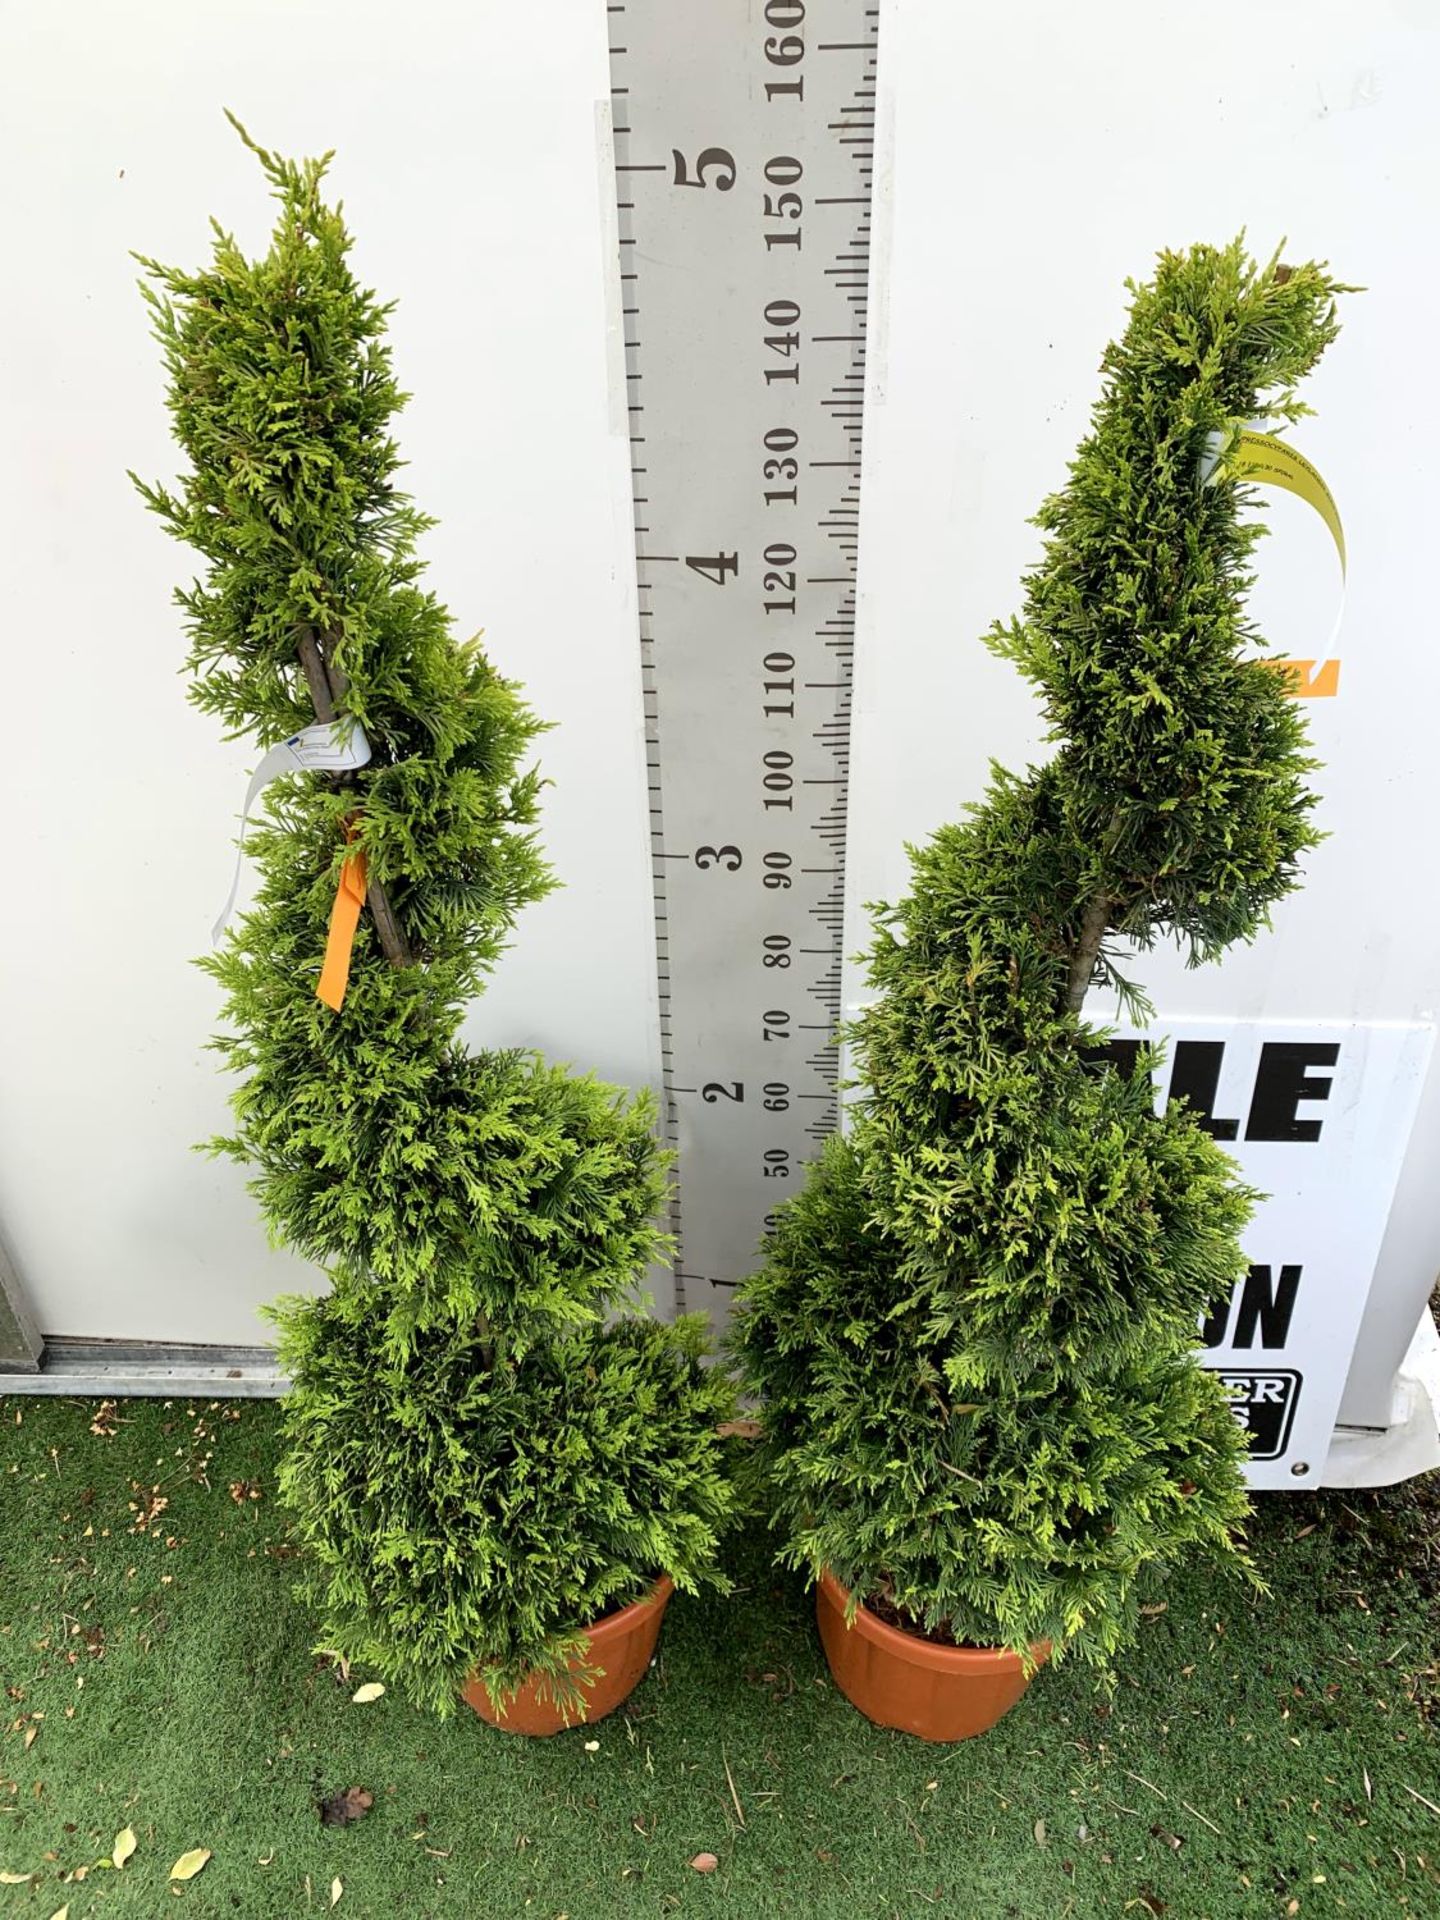 TWO SPIRAL CUPRESSOCYPARIS SPIRAL LEYANDII 'GOLD RIDER' APPROX 170CM IN HEIGHT IN 15 LTR POTS PLUS - Image 3 of 10